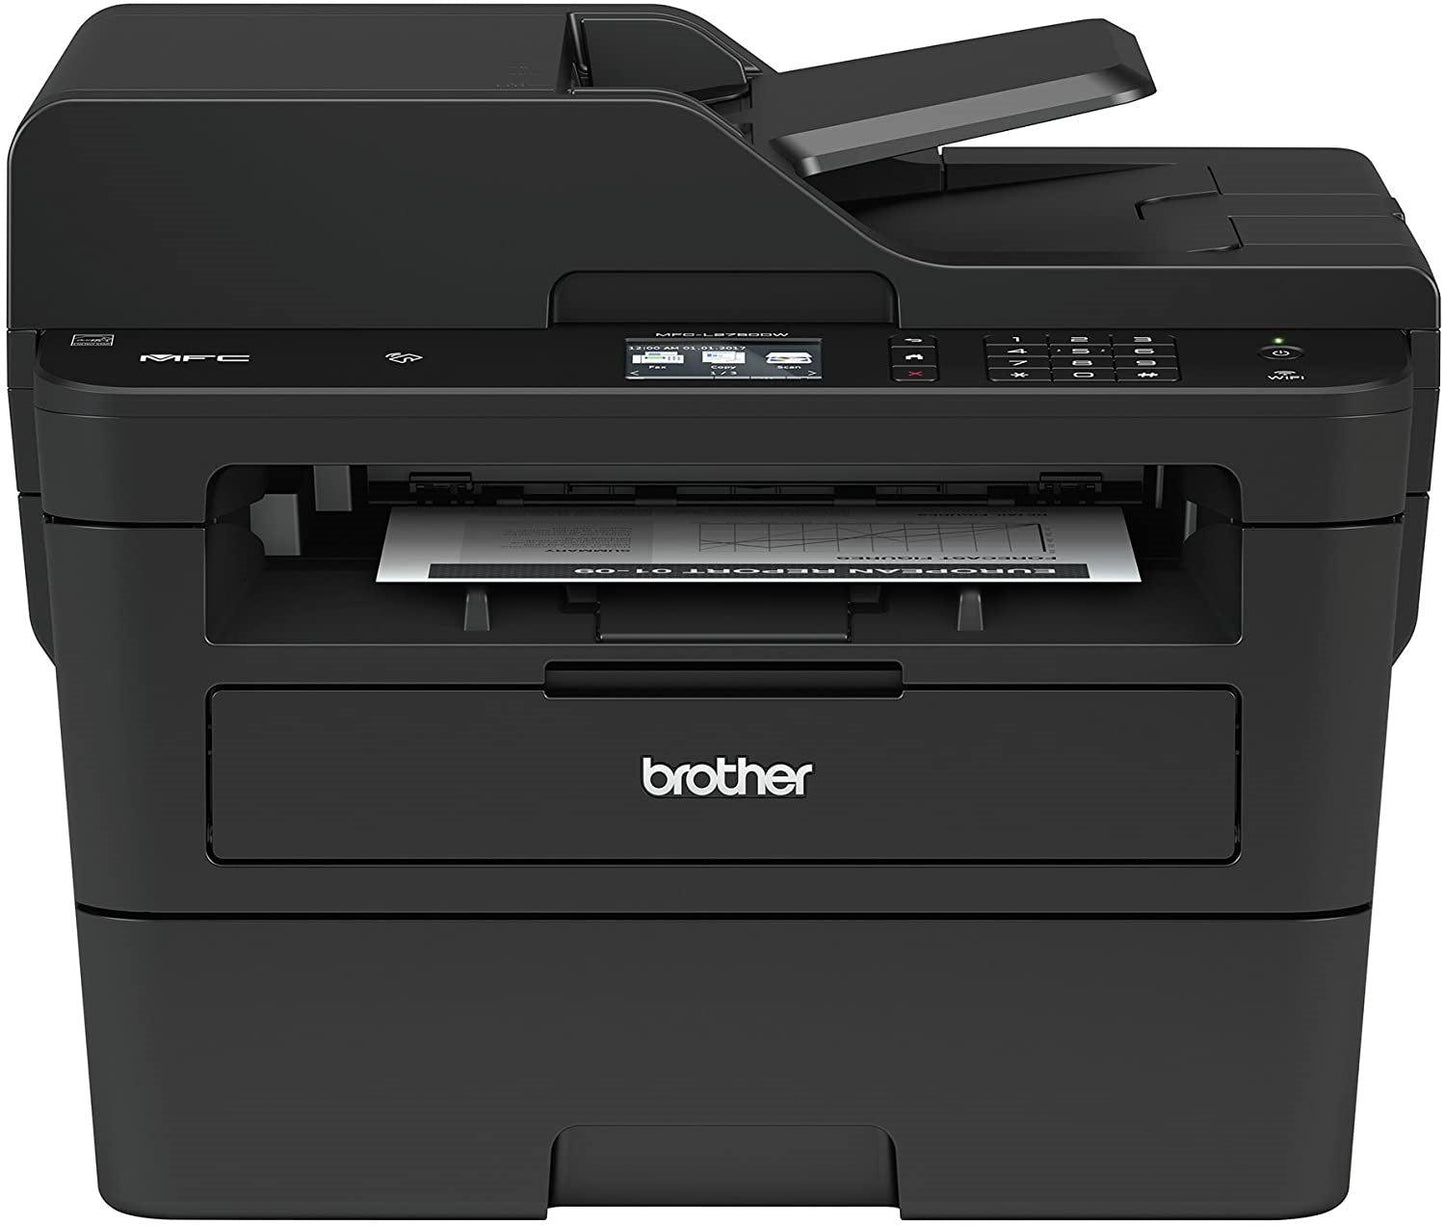 Brother Mfcl2750Dw Wireless Monochrome Printer With Scanner, Copier & Fax, Black